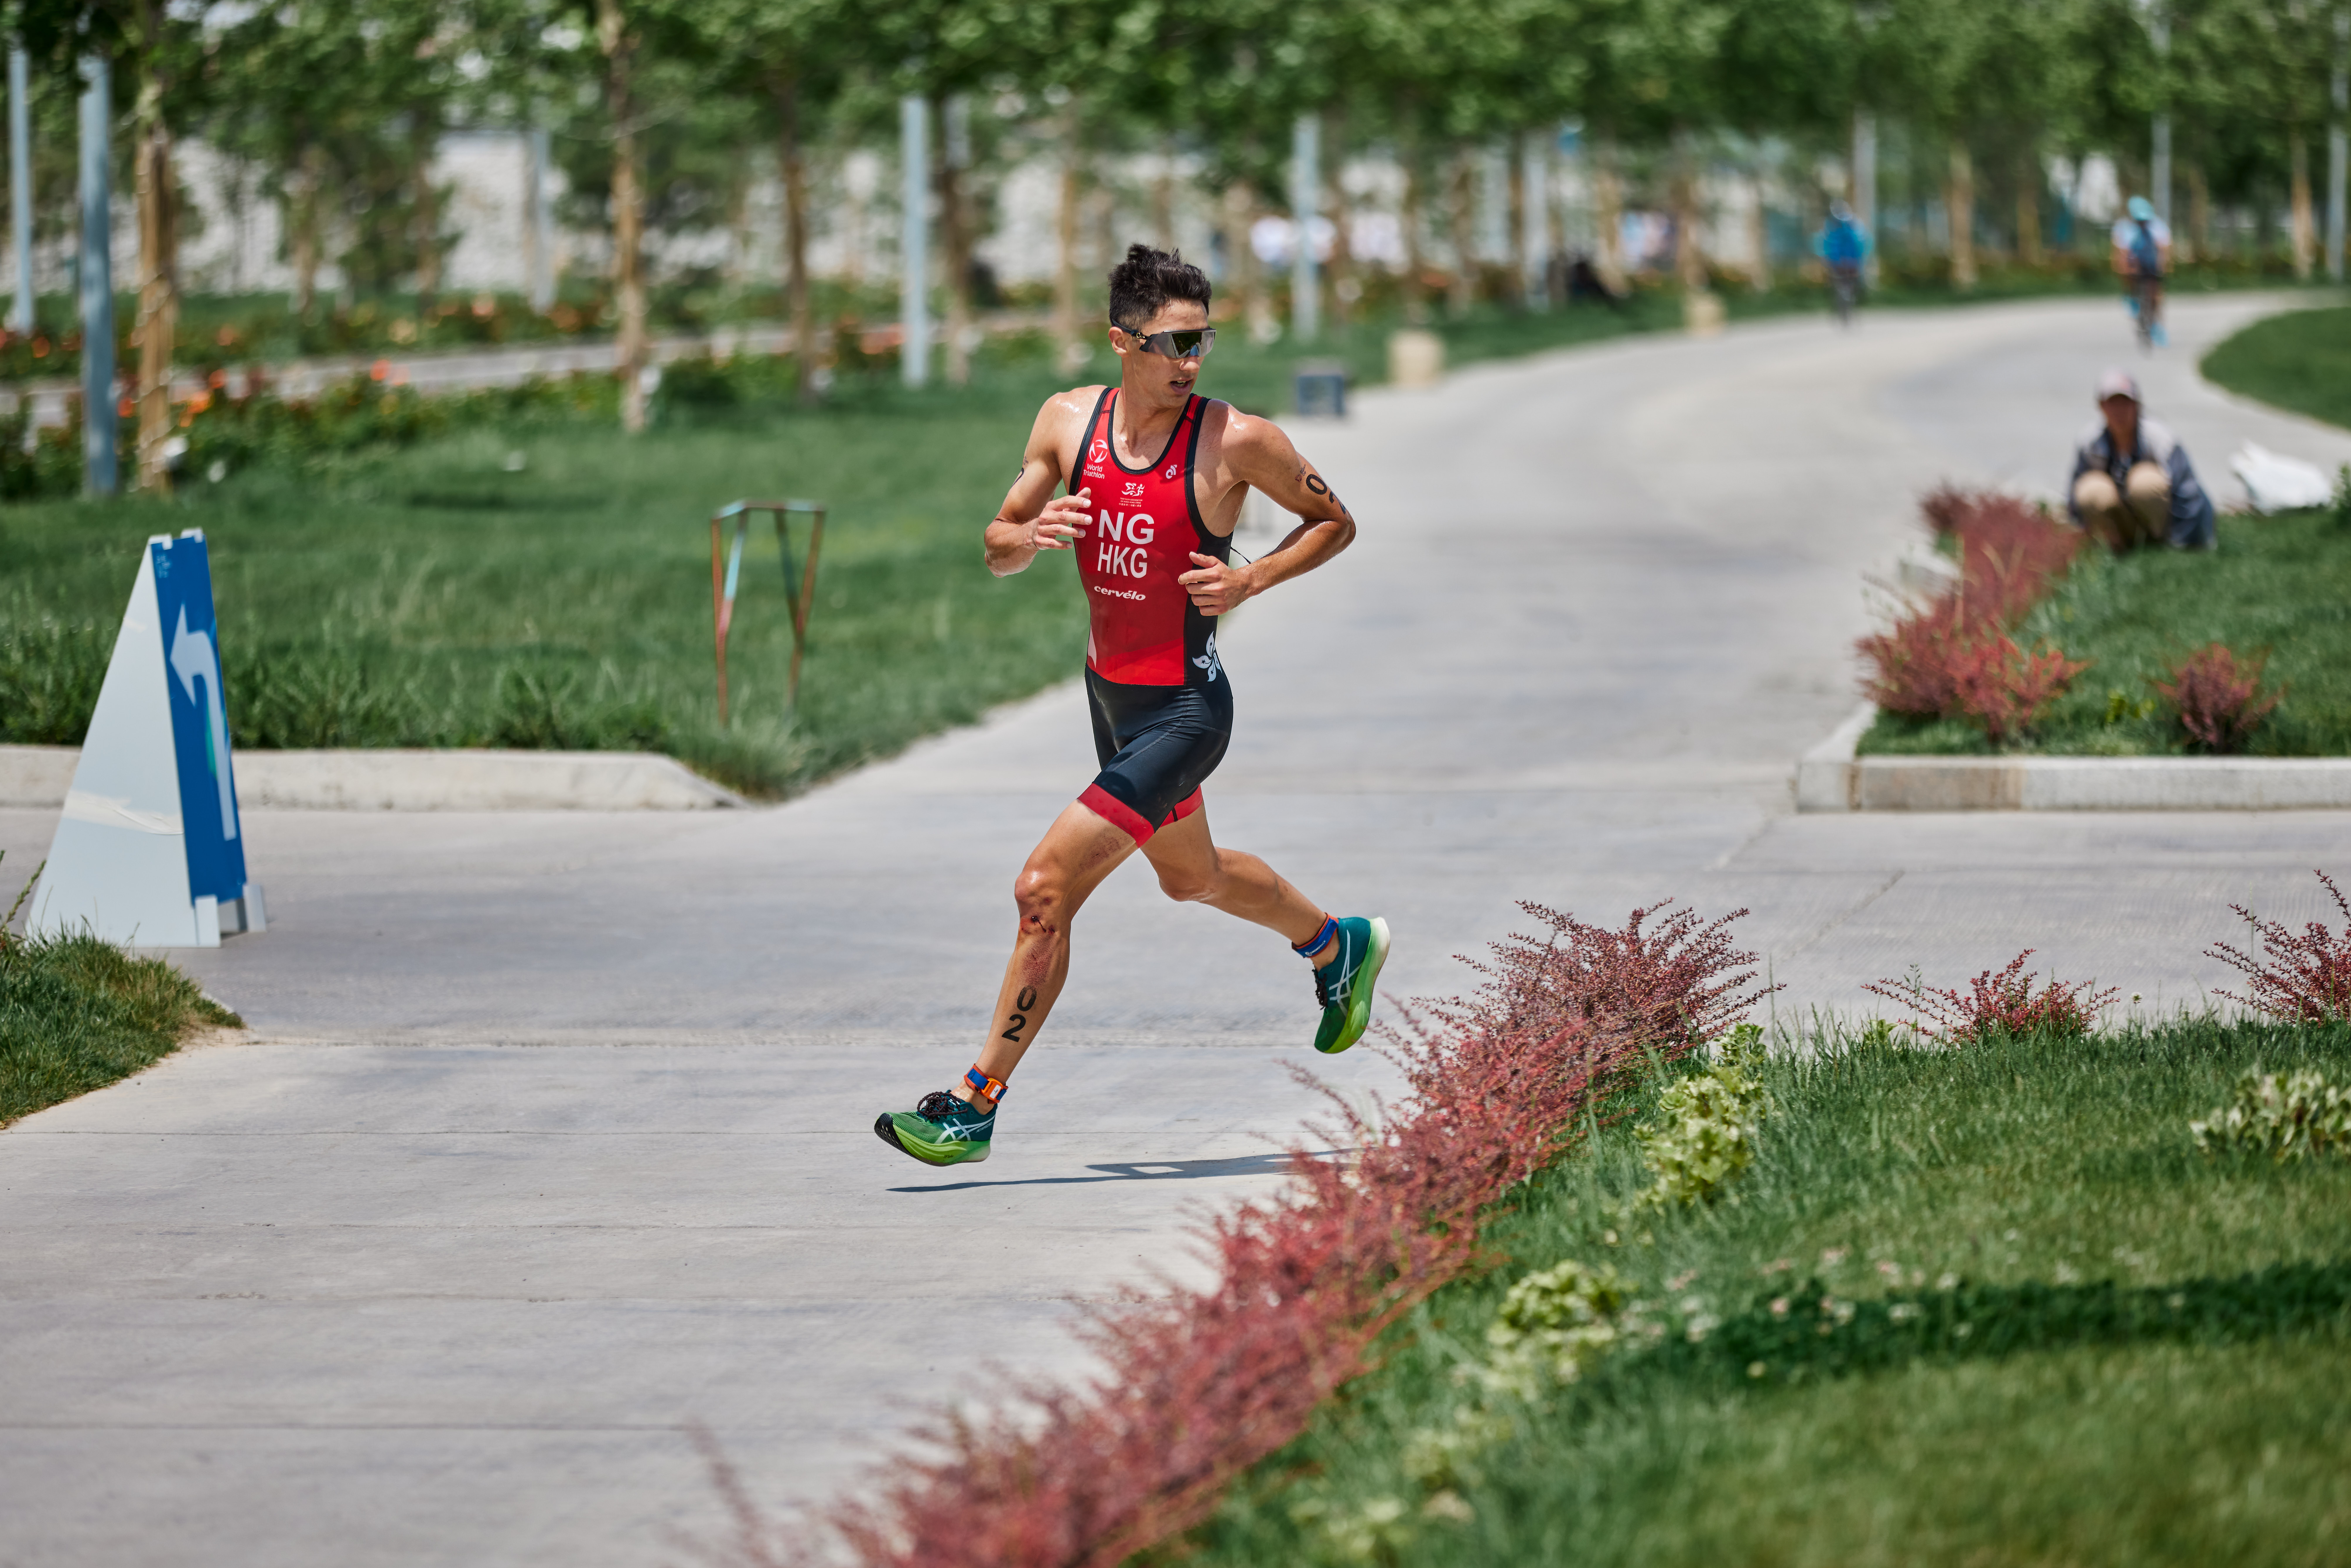 Jason has qualified to compete at the 19th Asian Games in September. (Photo: Uzbekistan Triathlon Federation)